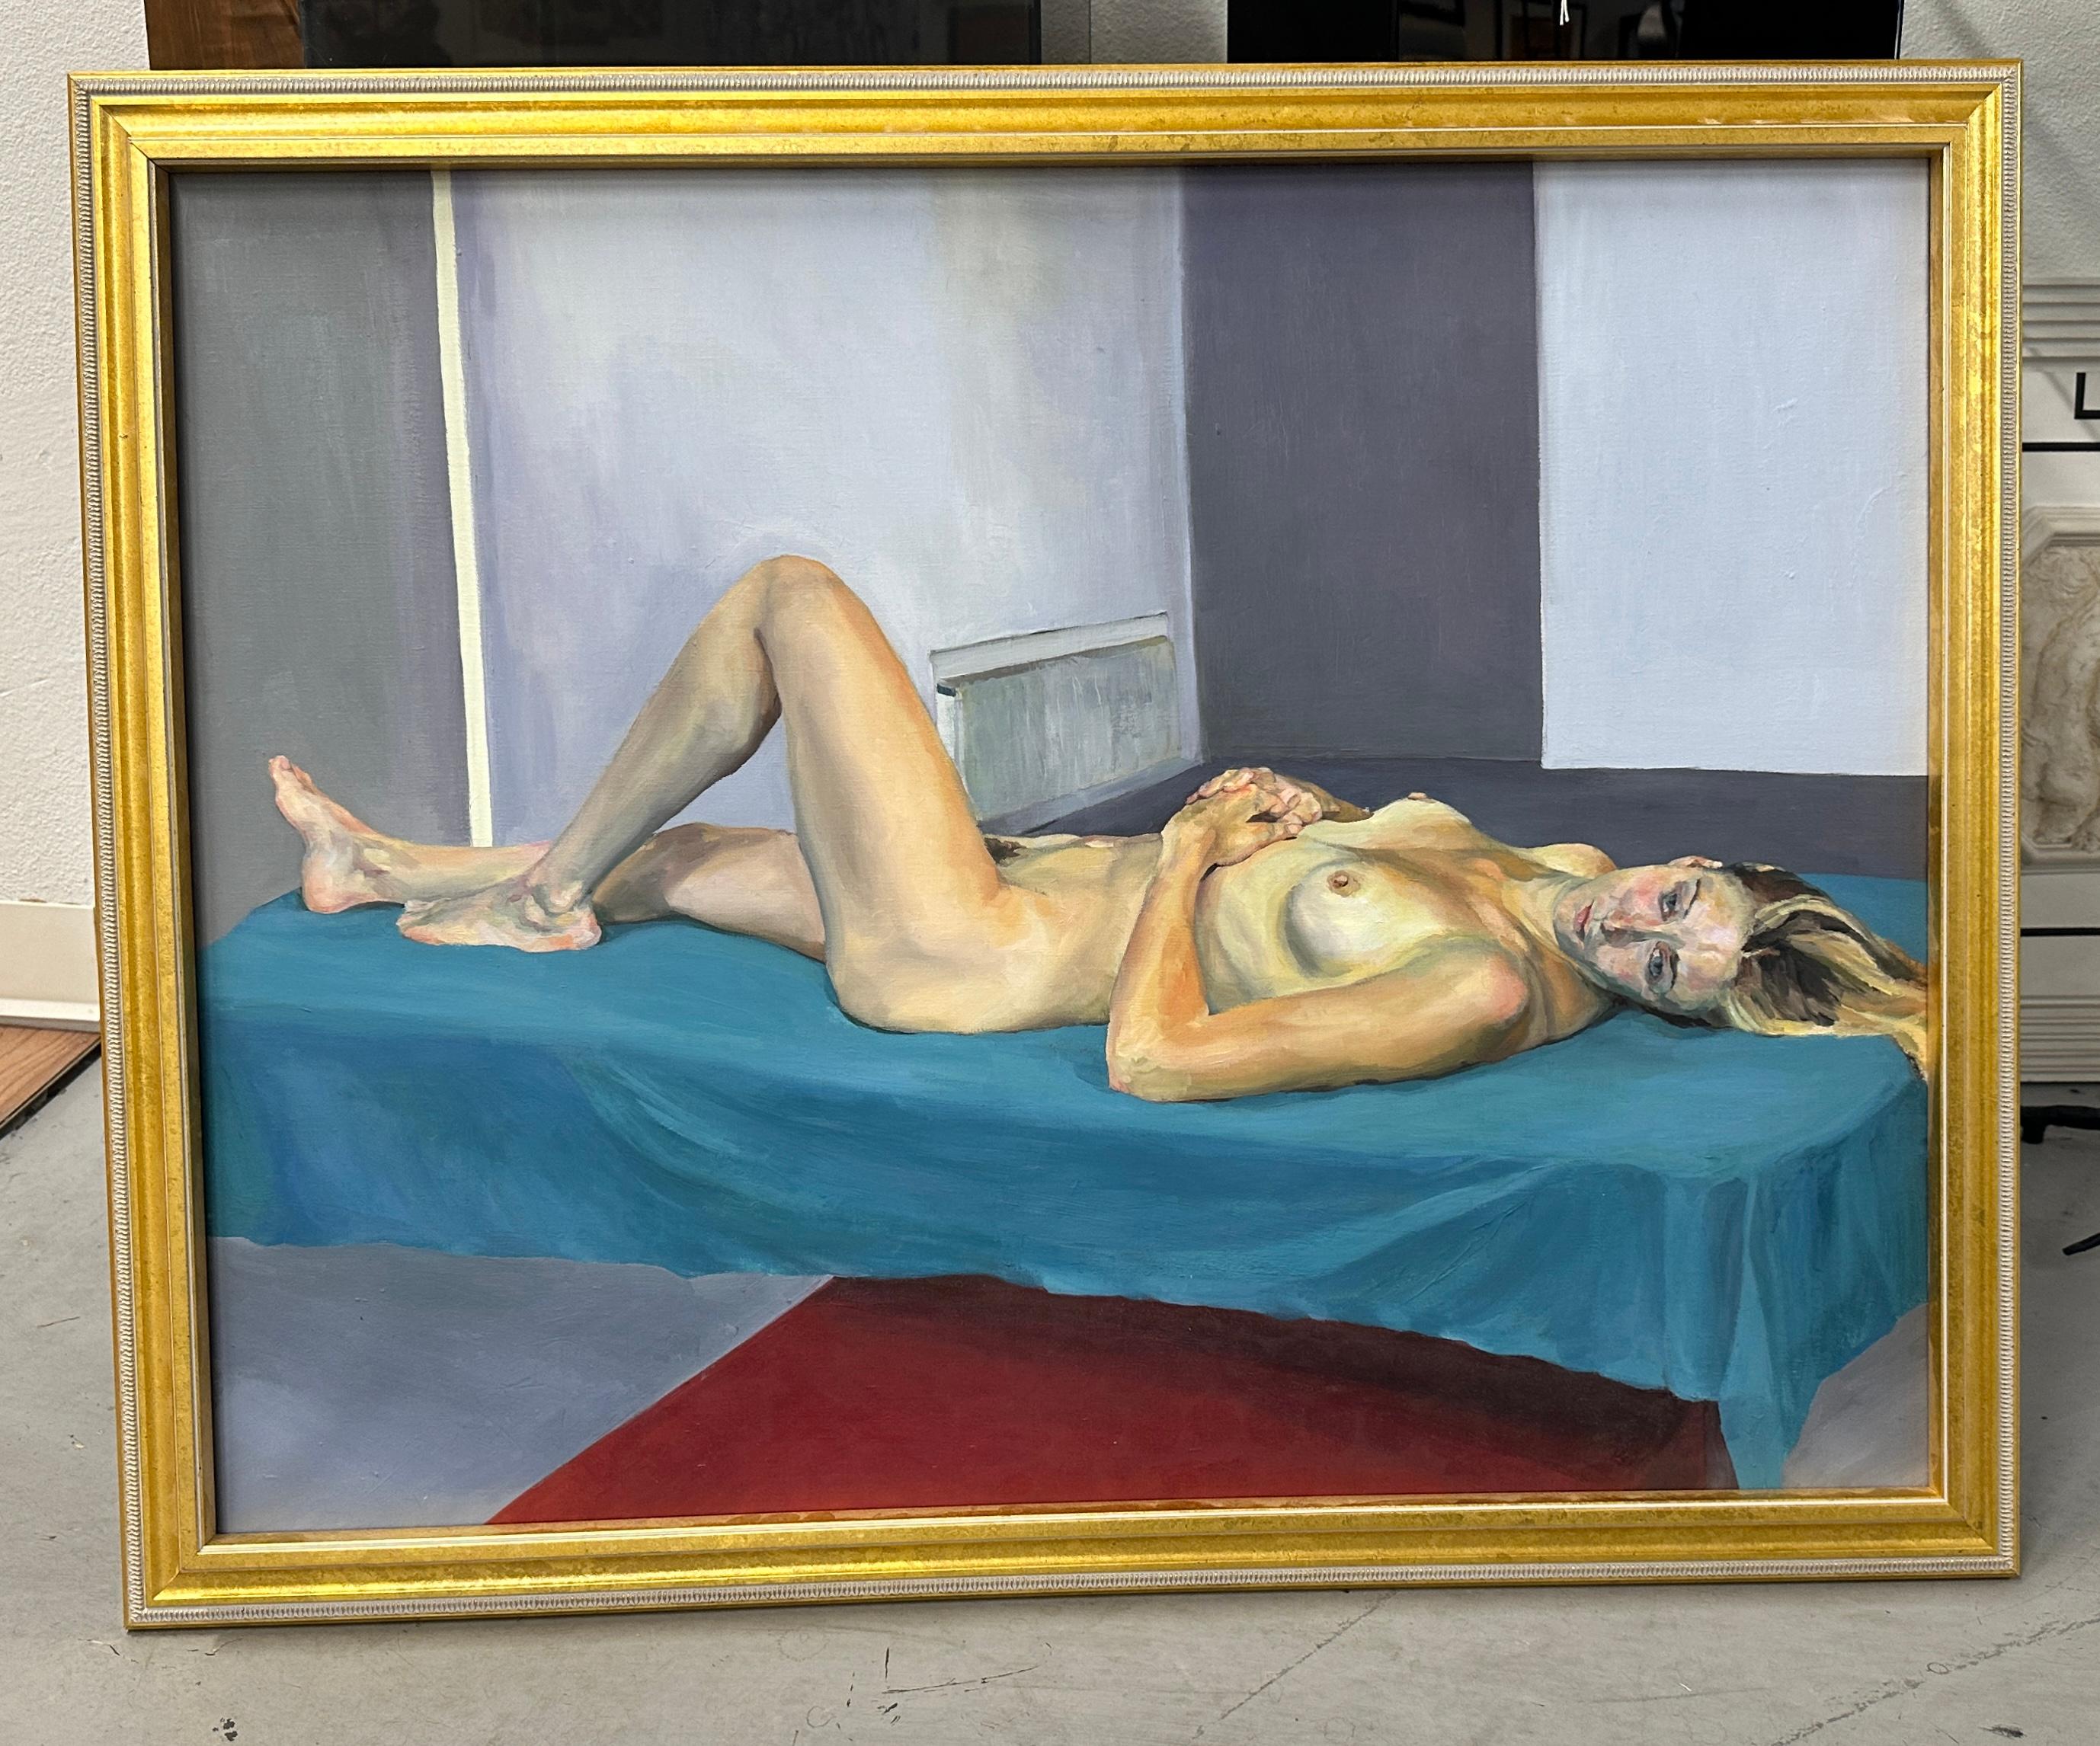 1999 Oil on Linen by Natalie Frank “Claire” Slade, London  For Sale 2